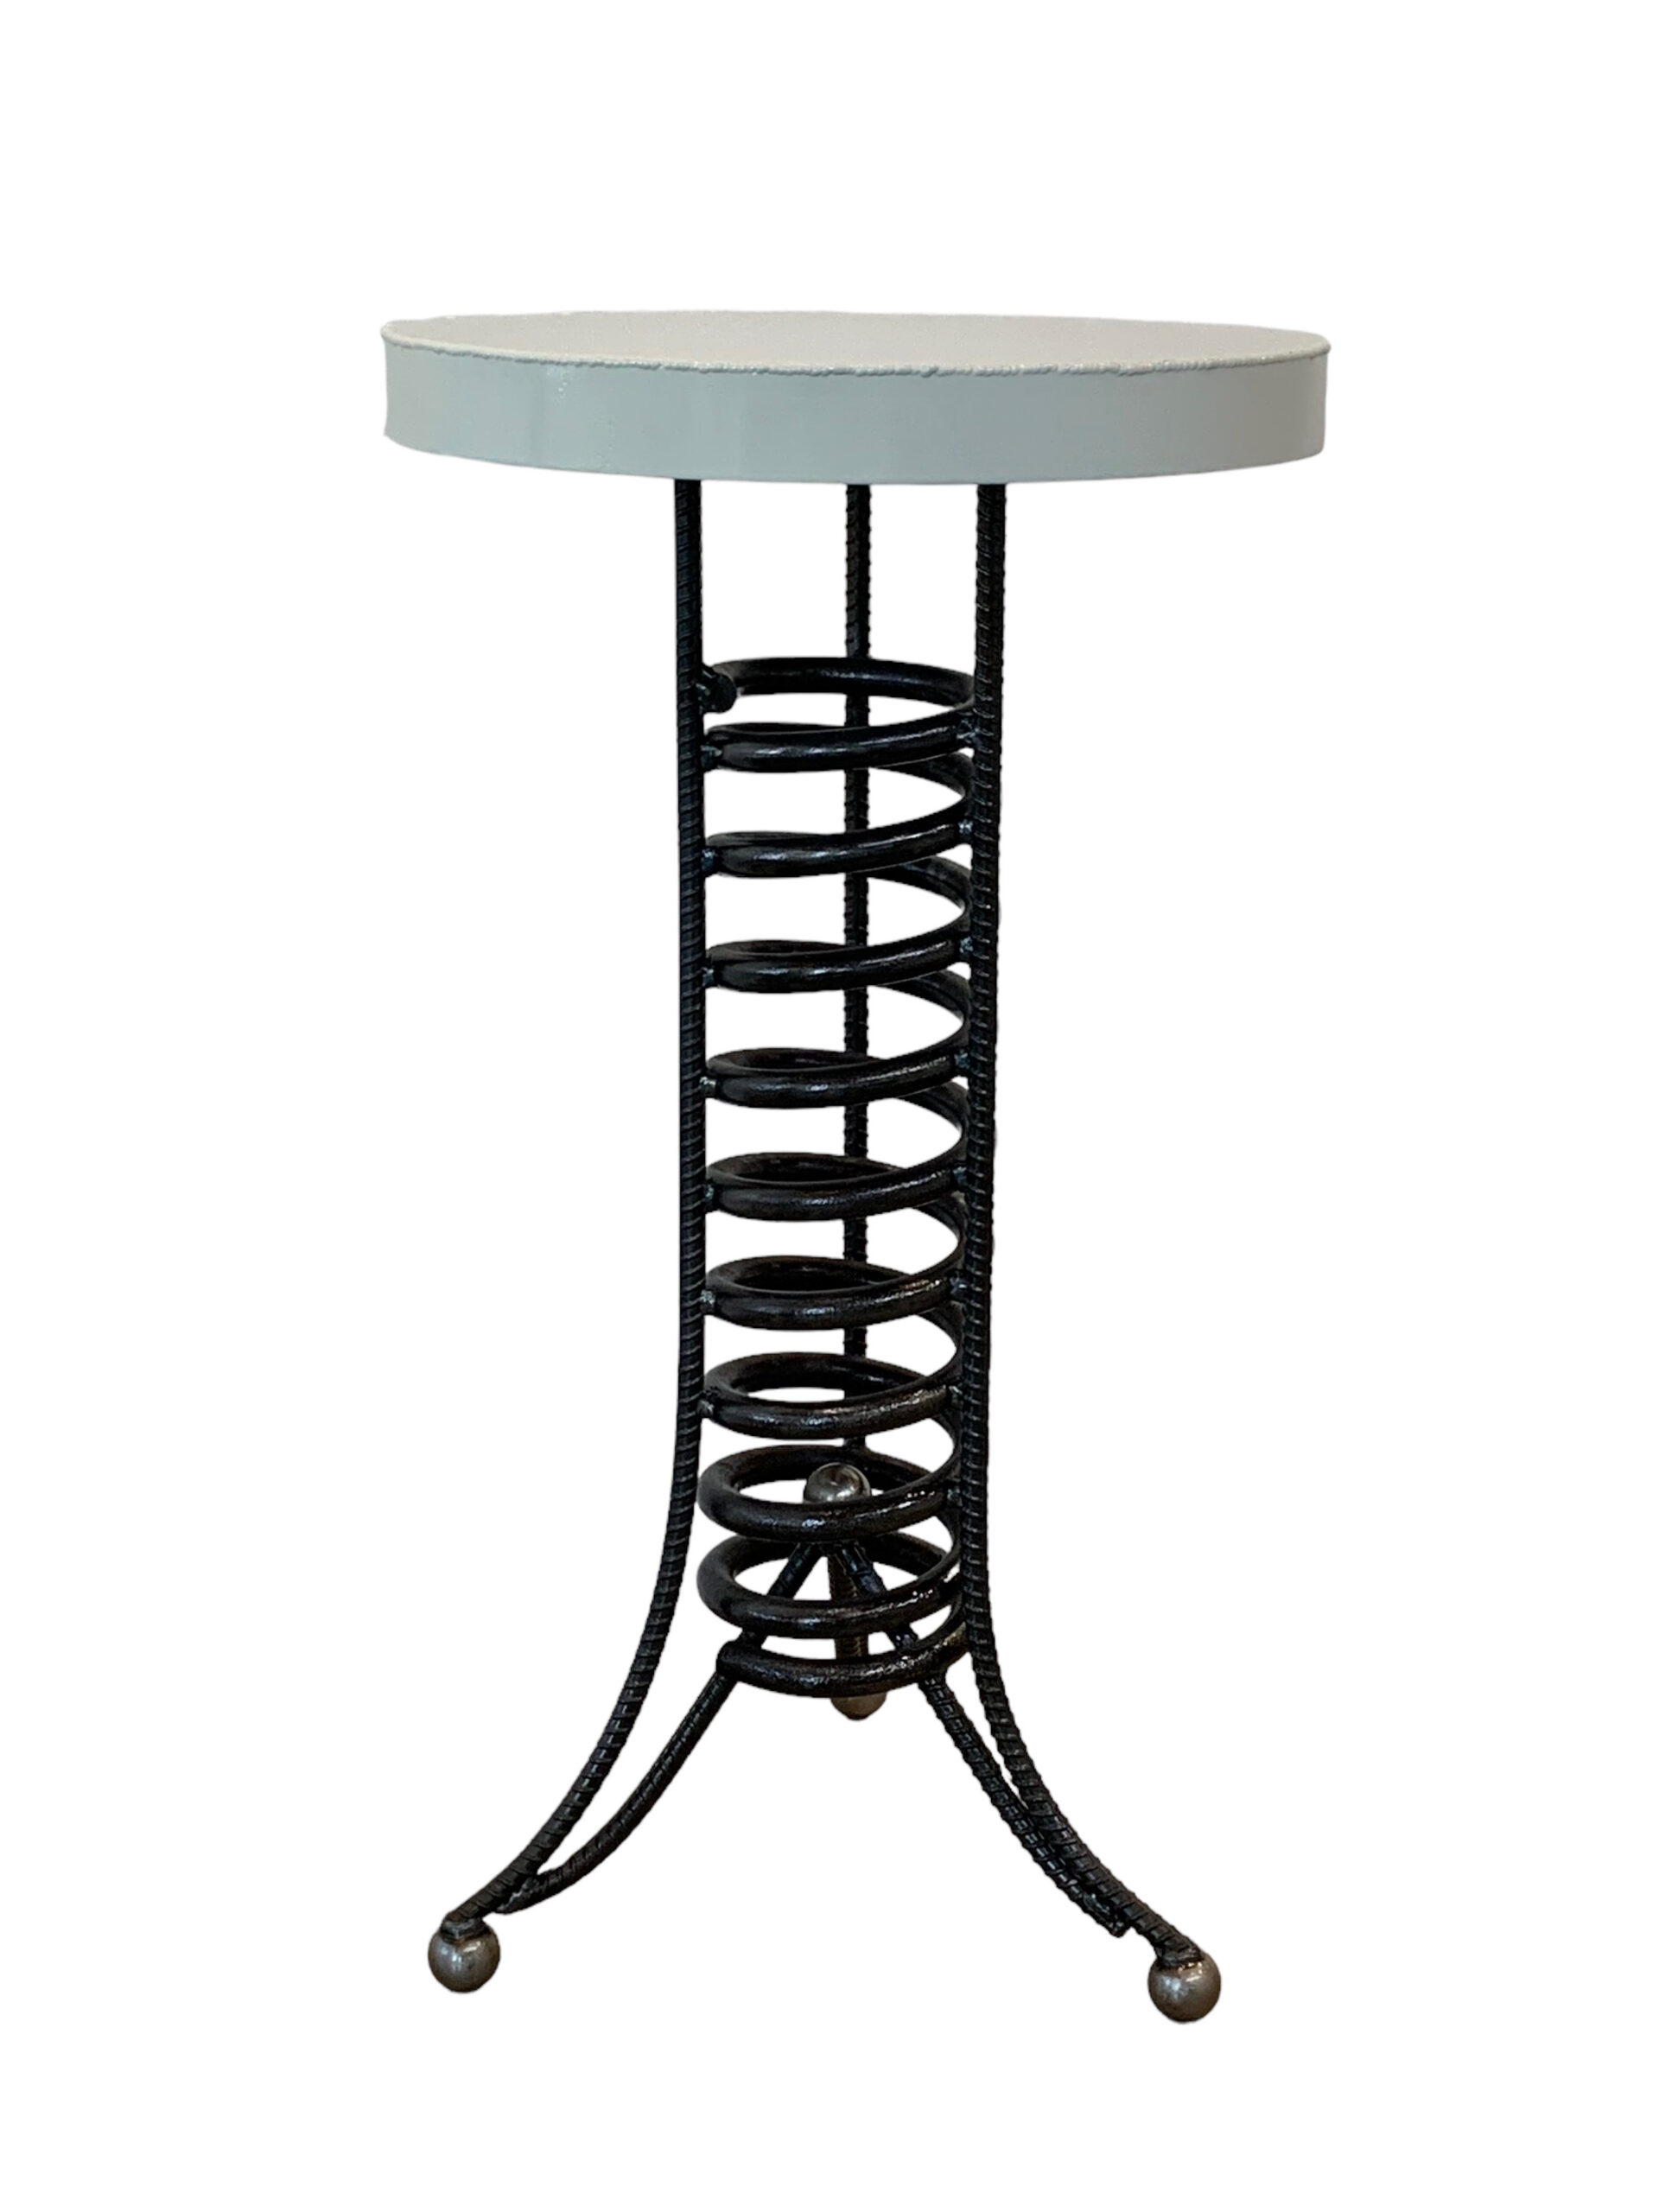 Alpine Side Table 4, reclaimed metal nesting side table by Wendy Stone | Effusion Art Gallery, Invermere BC